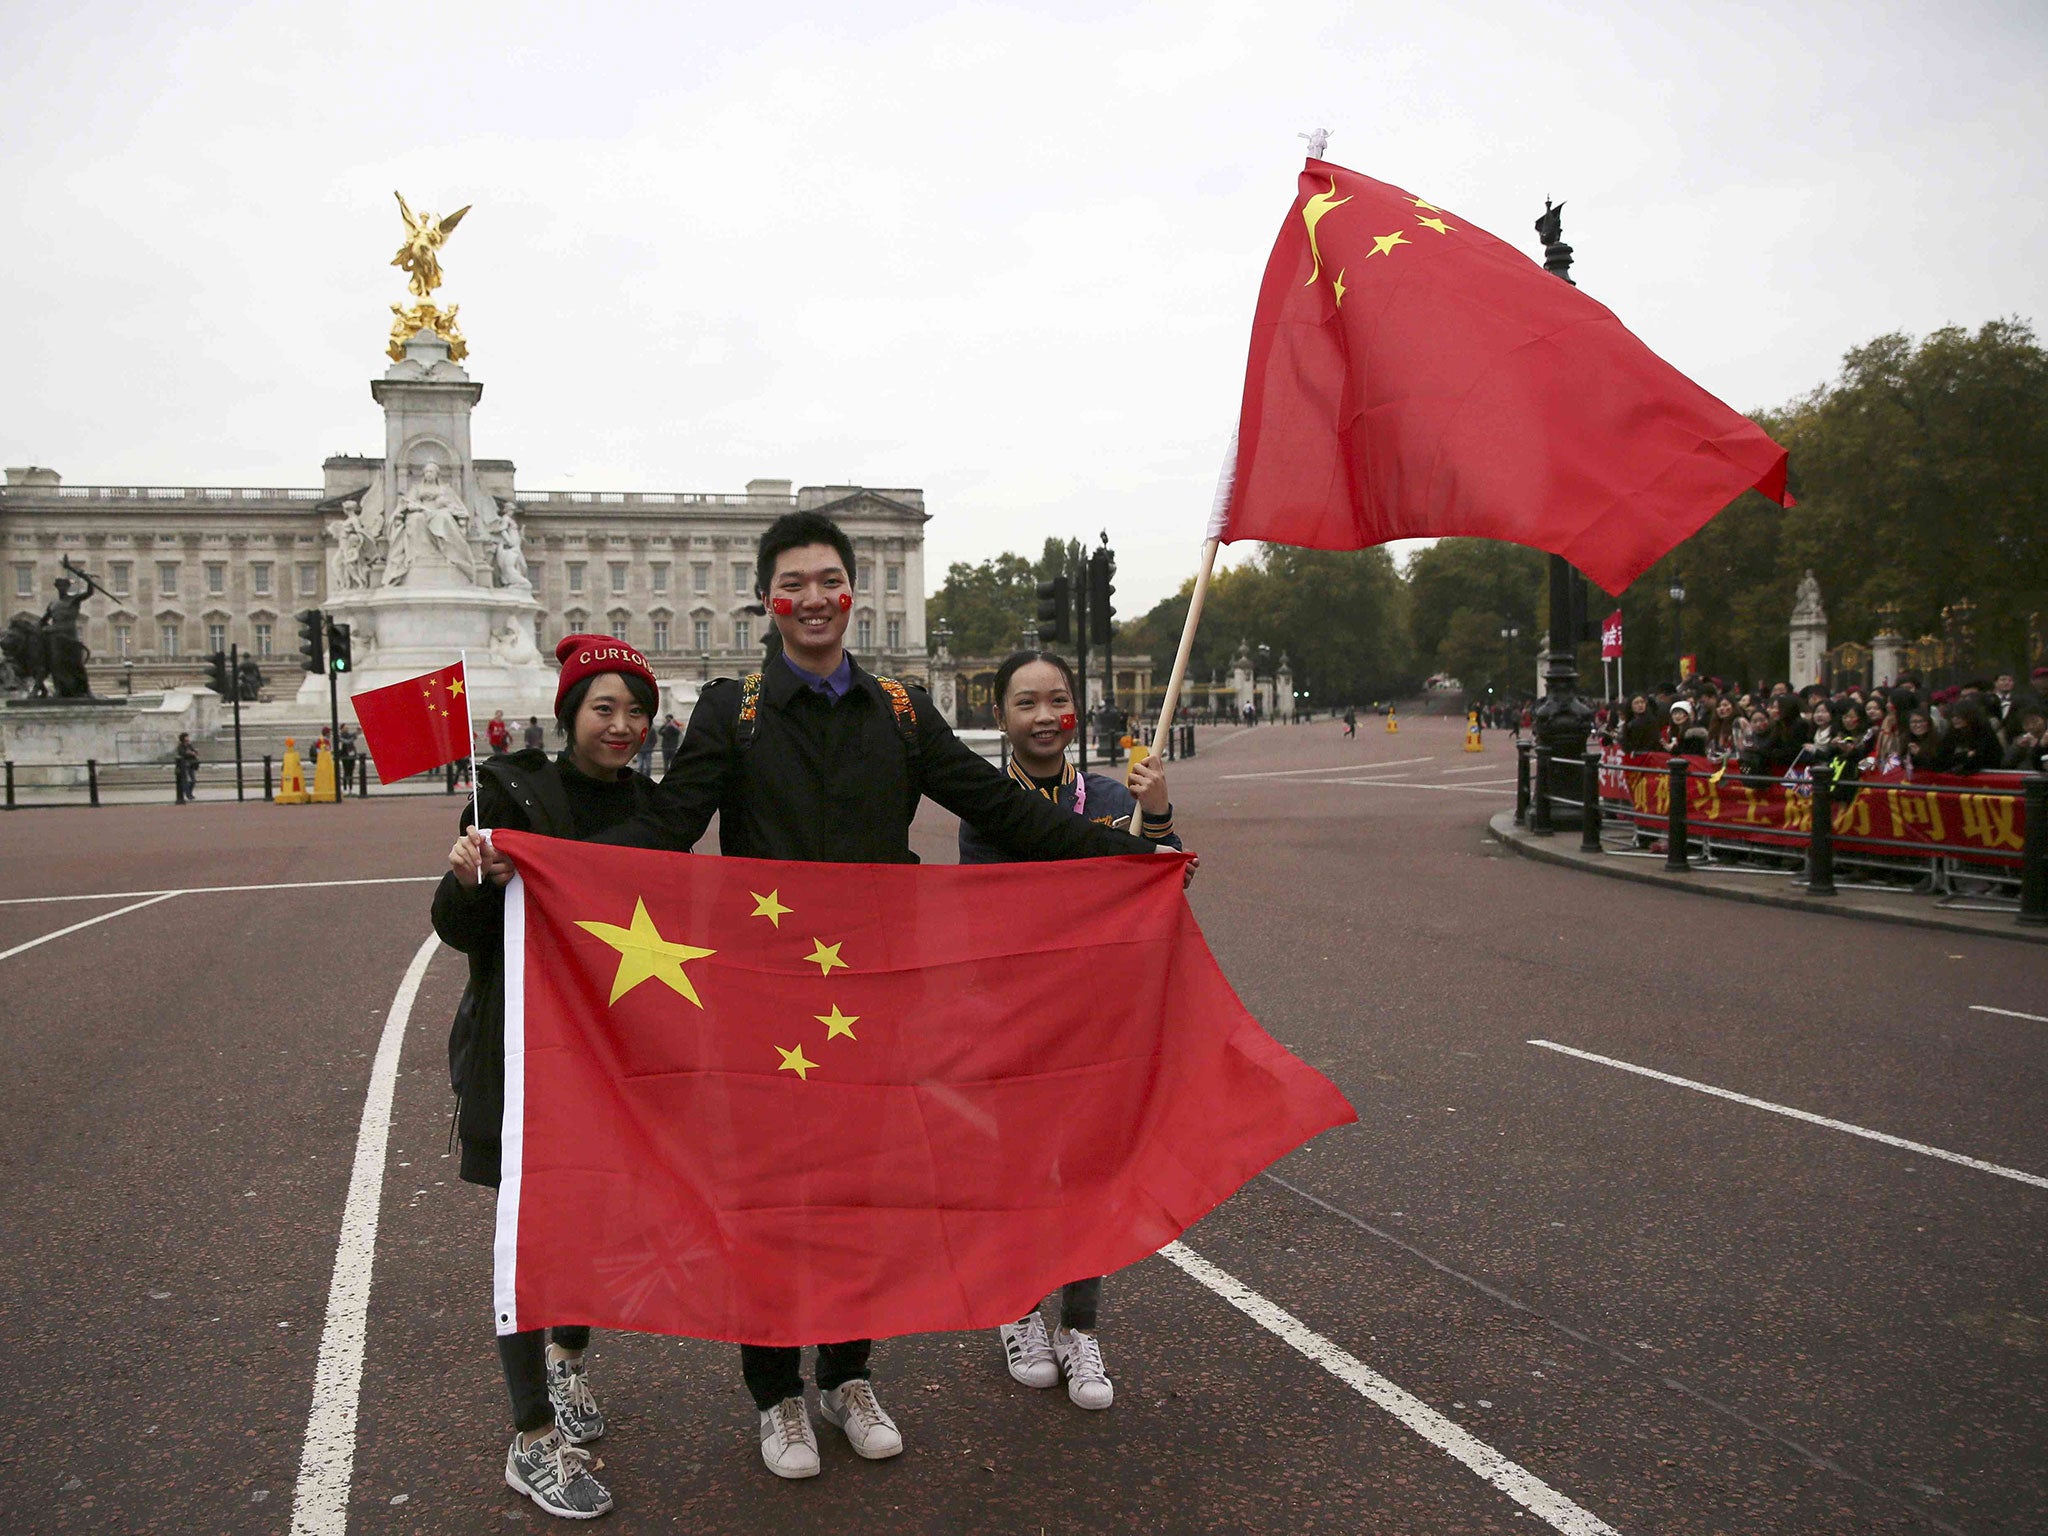 Supporters of China's President Xi Jinping wait on the Mall for him to pass during his ceremonial welcome, in London, 20 October 2015